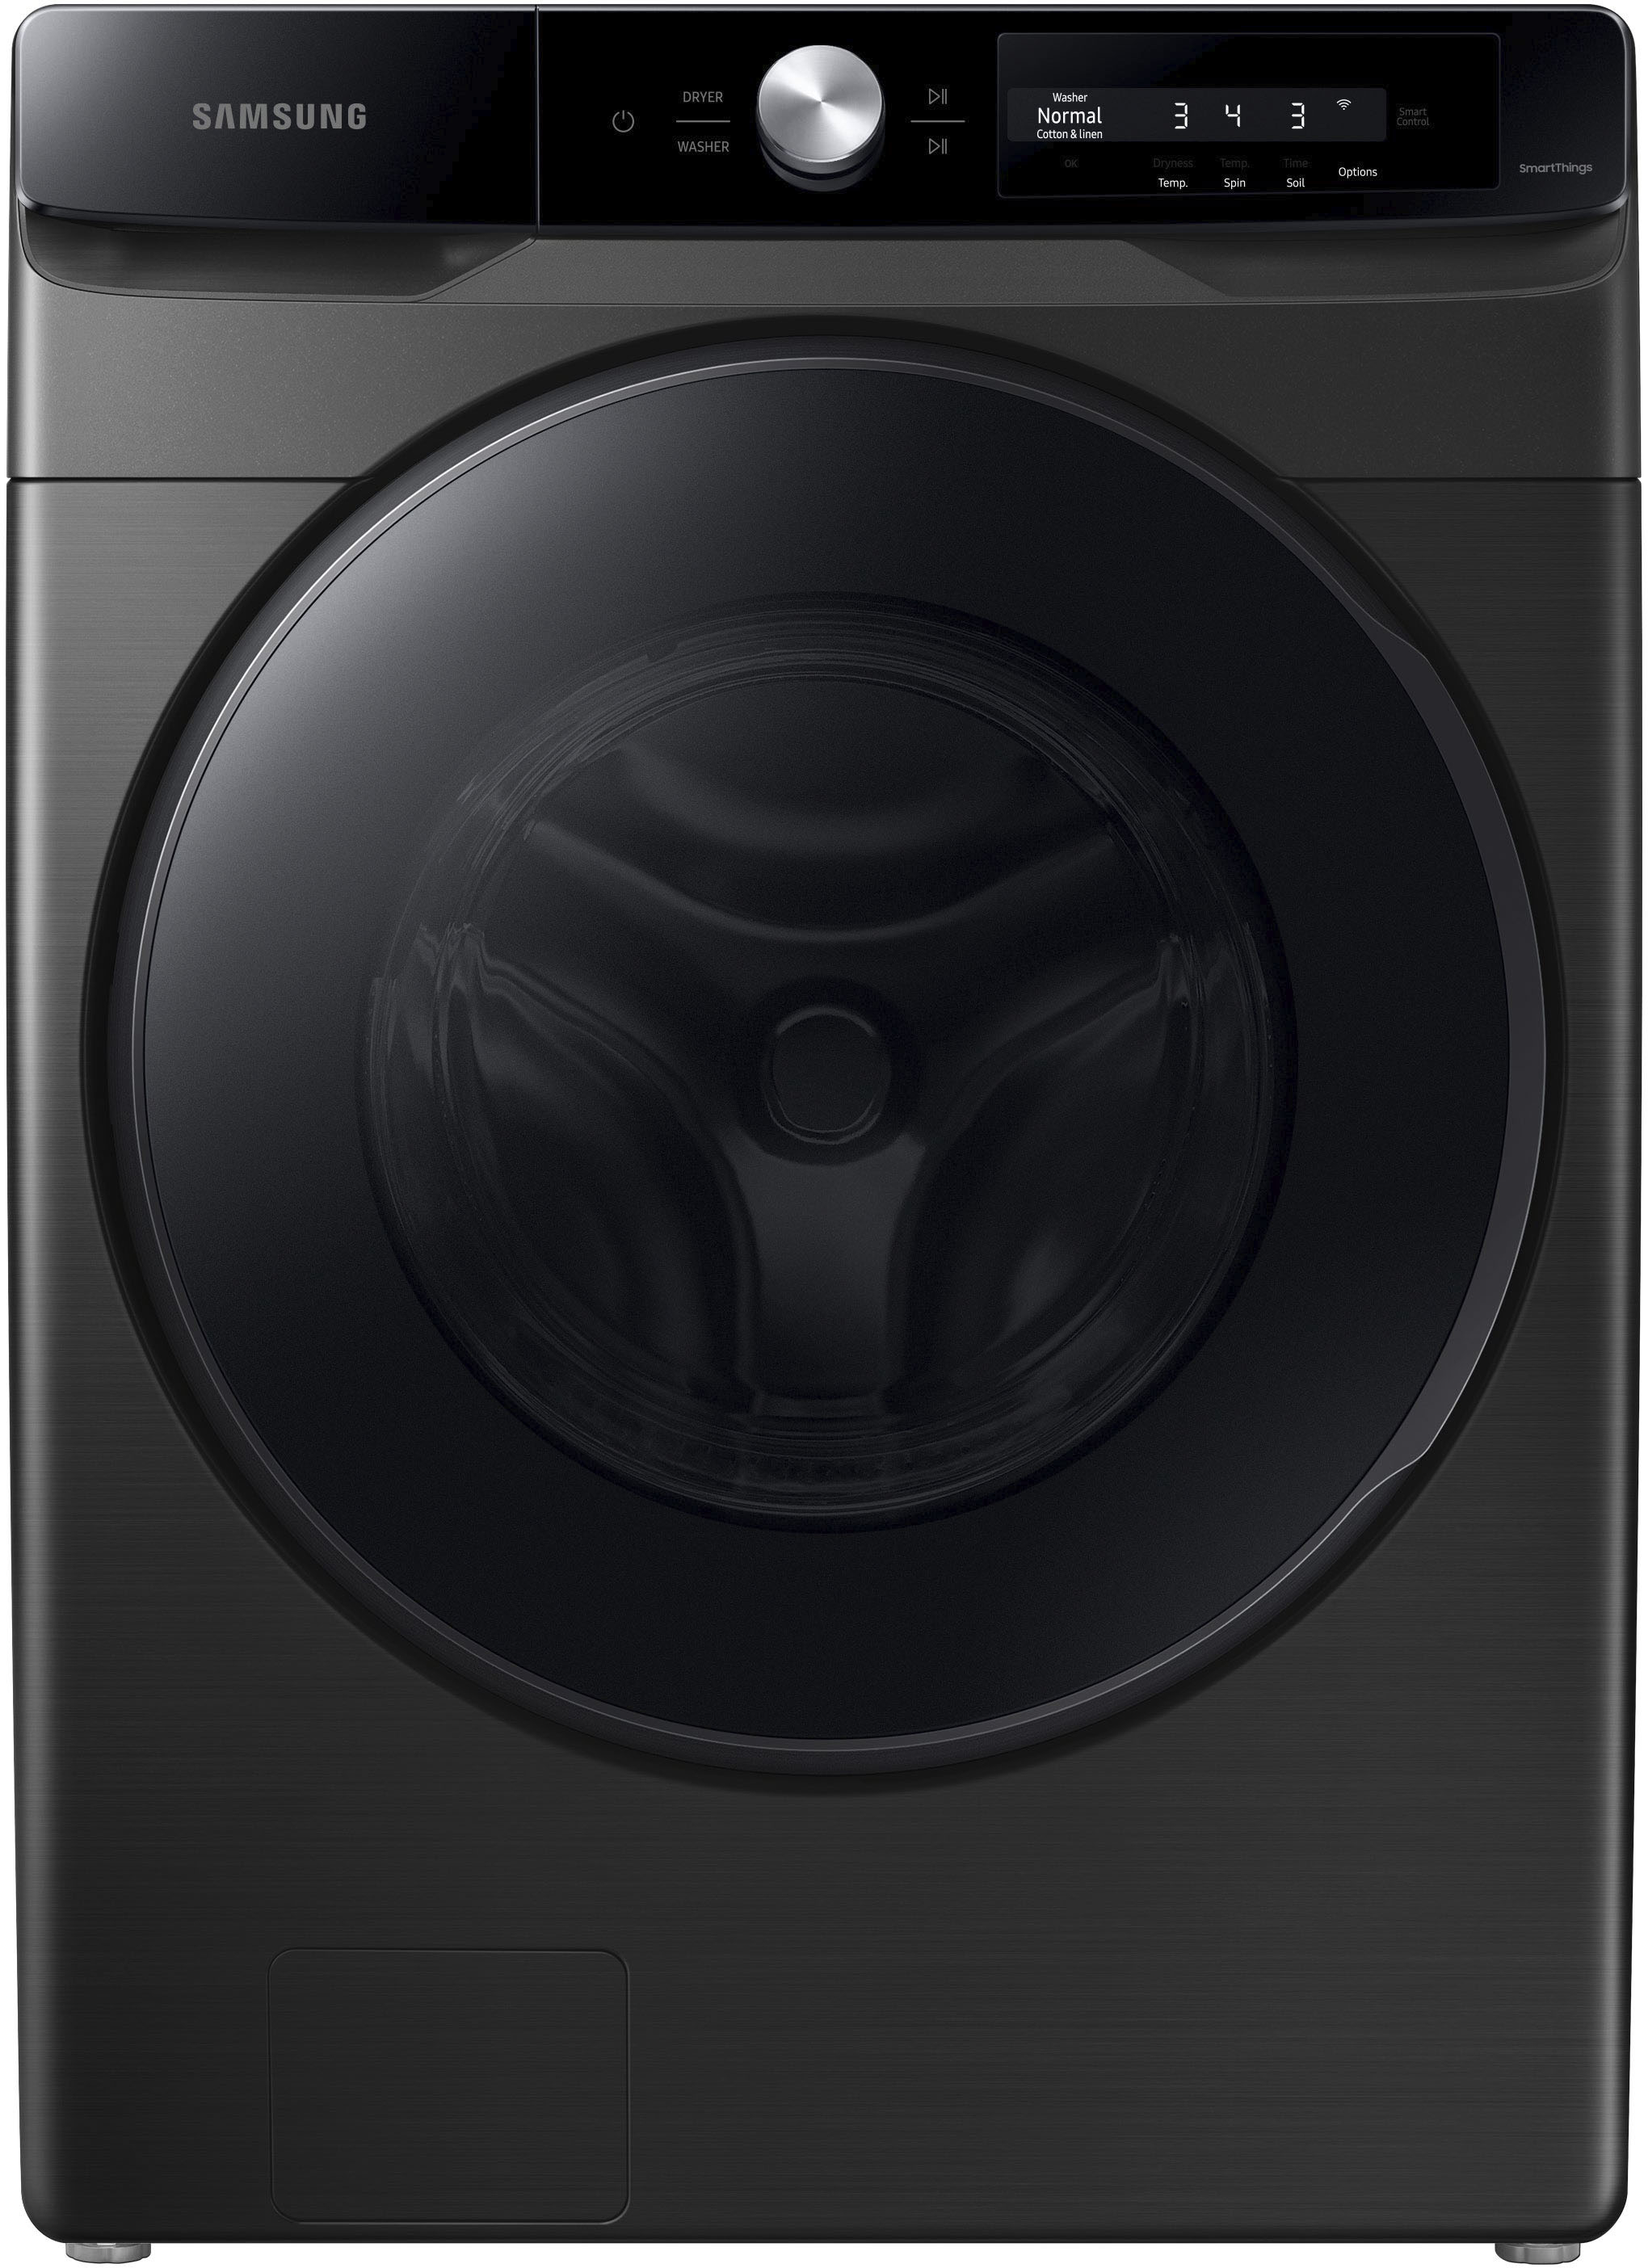 Samsung - 4.5 cu. ft. Large Capacity Smart Dial Front Load Washer with Super Speed Wash - Brushed black